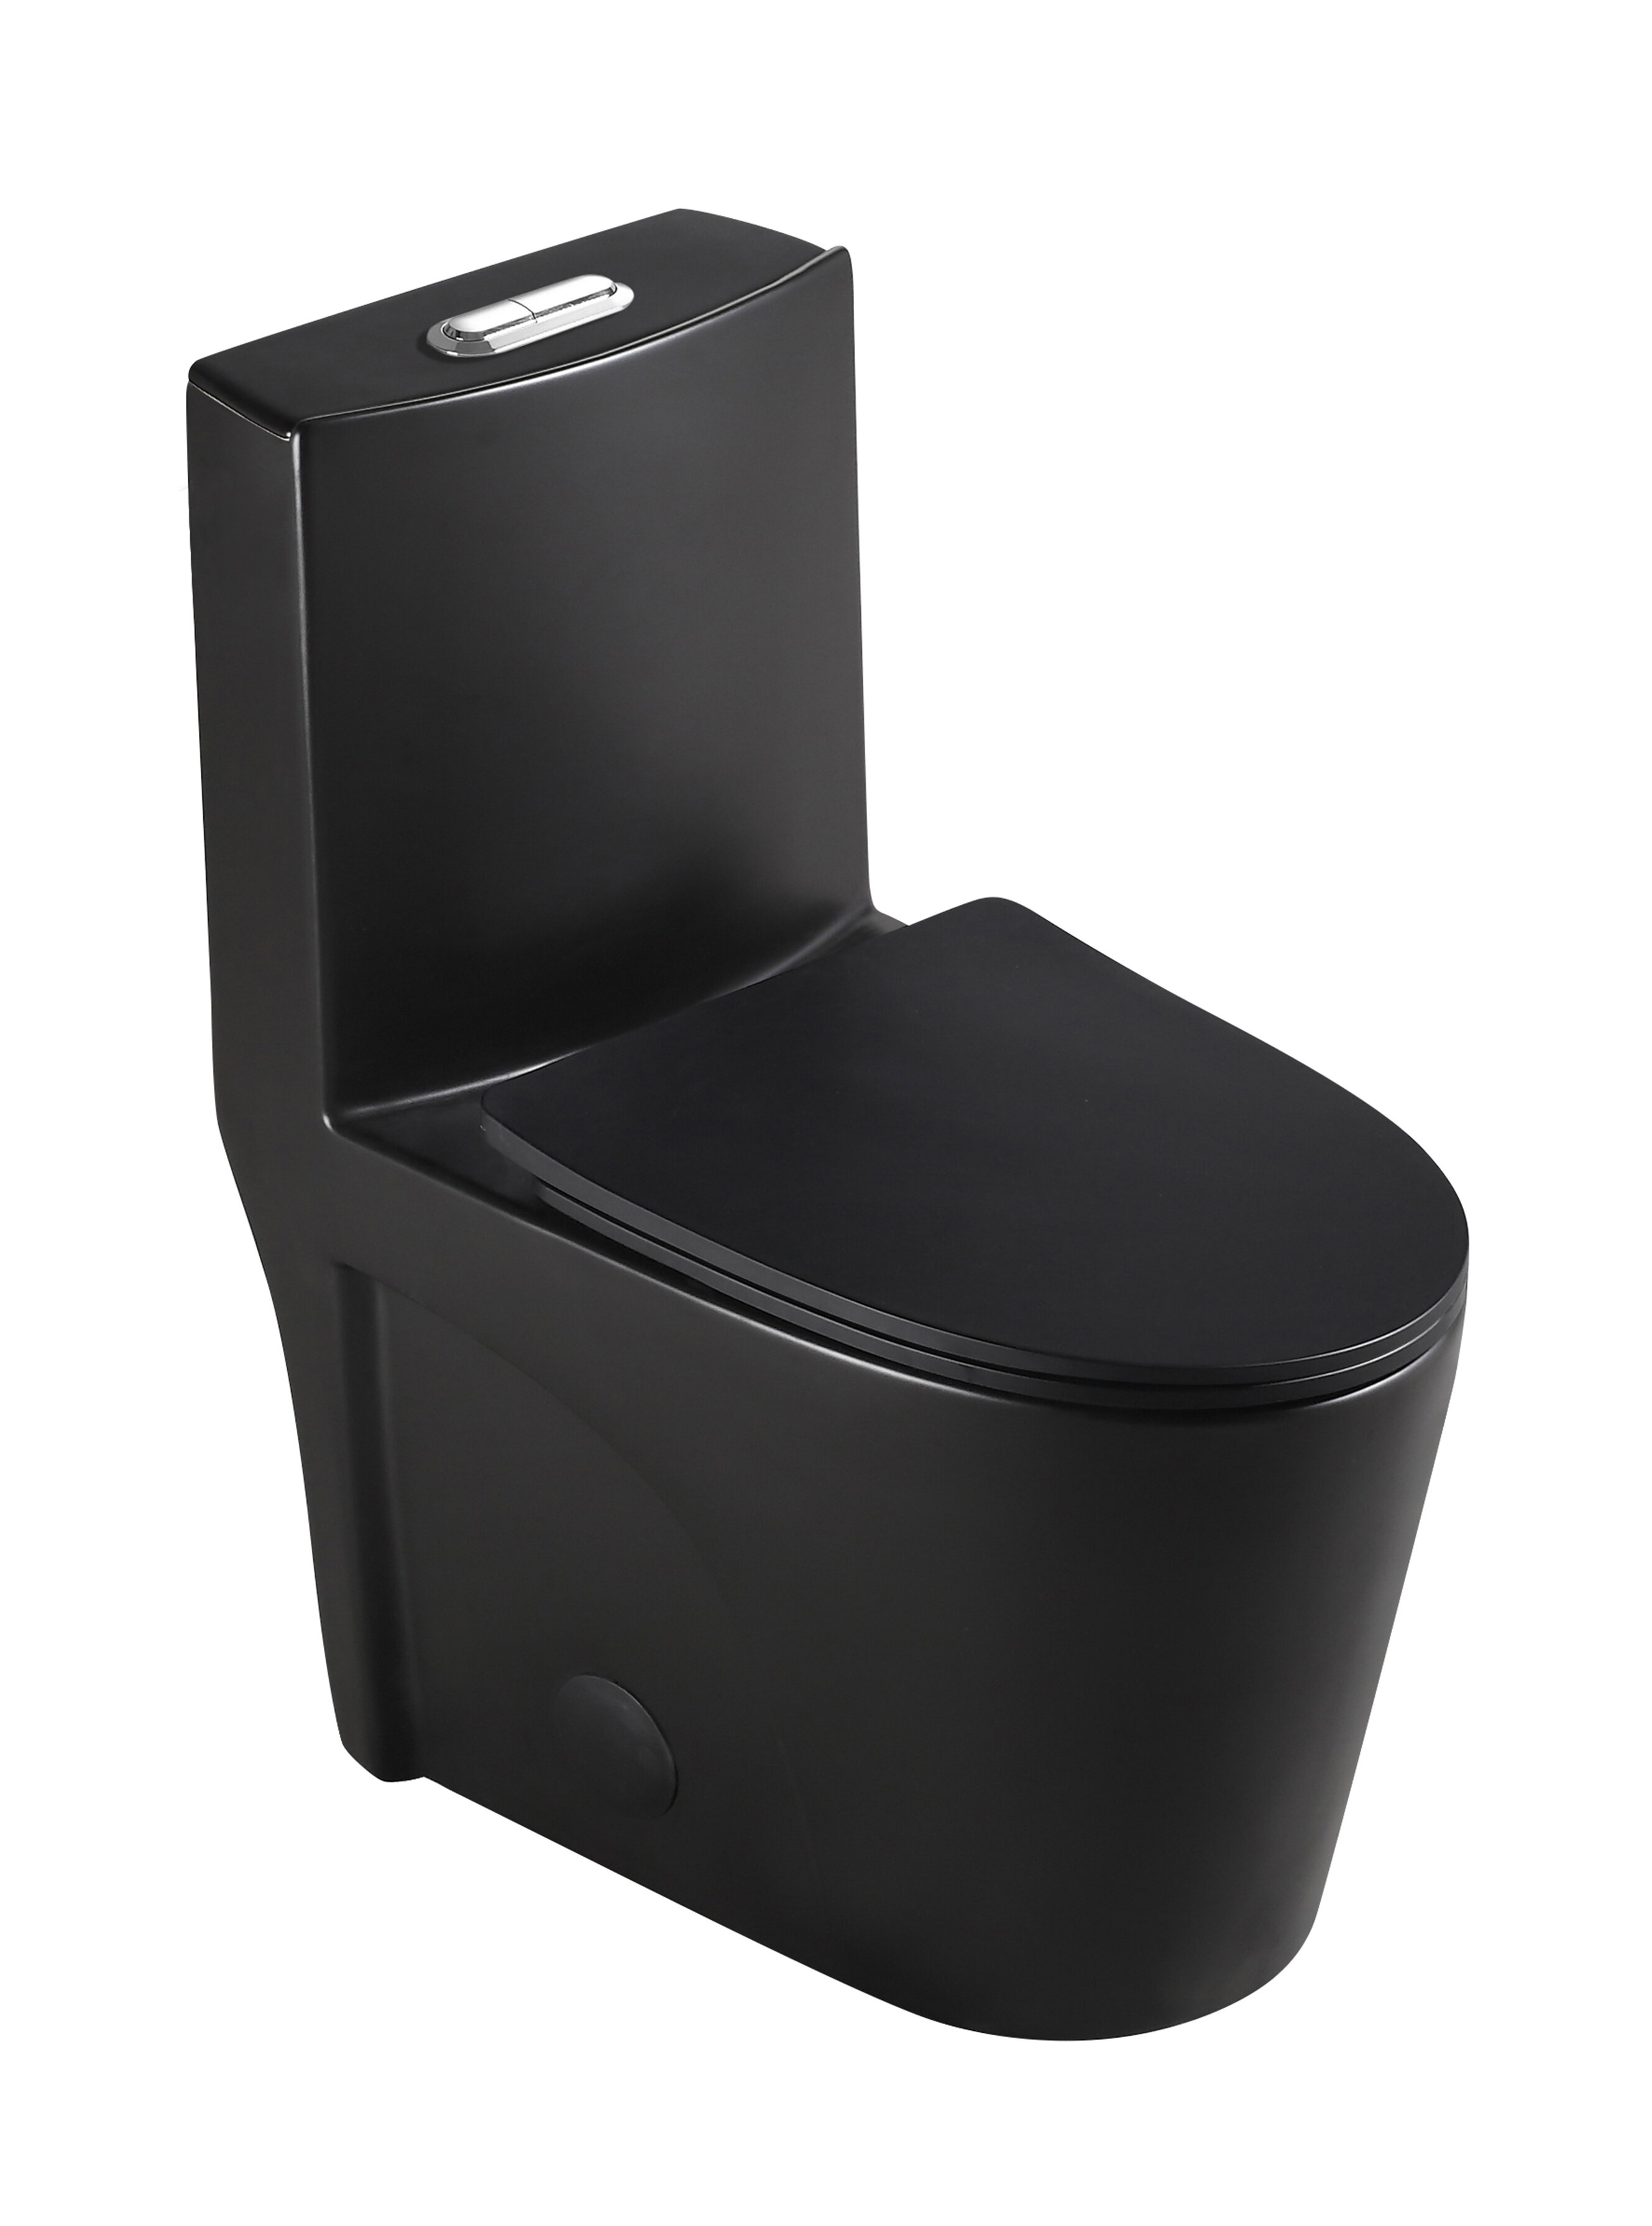 Glexero Square Shape Floor Mounted Commode. S Trap 9Inch Western